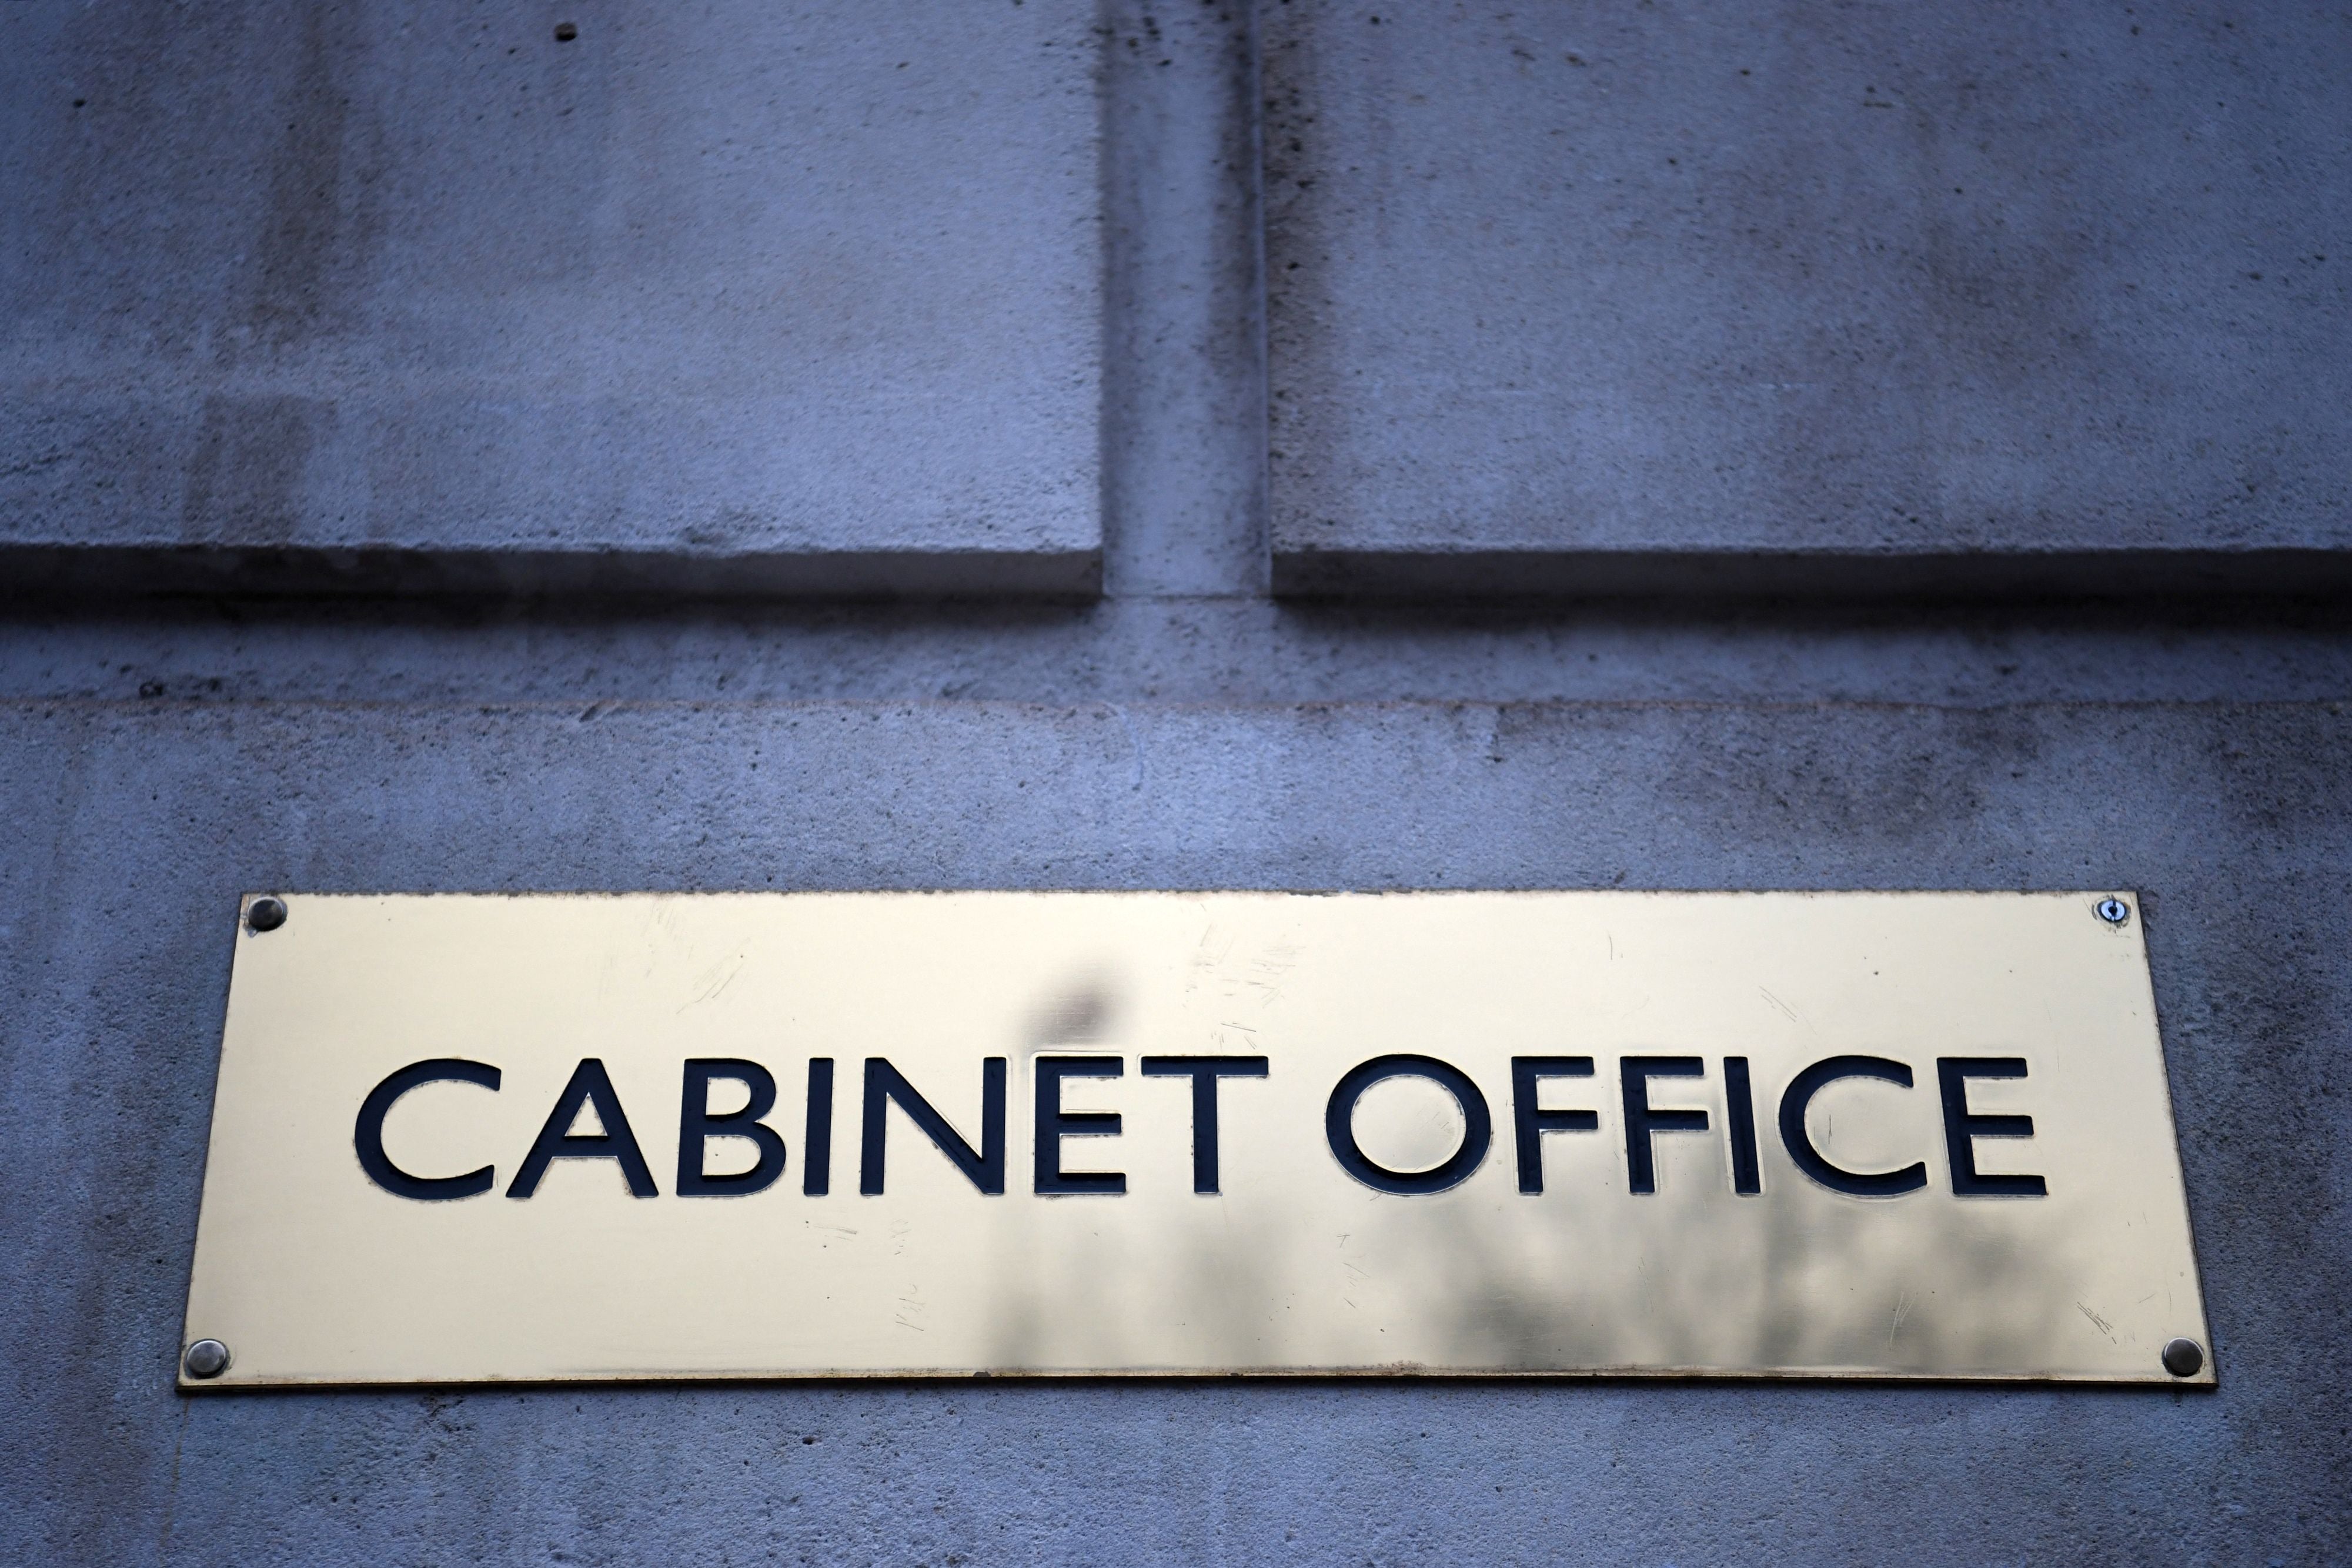 The Independent previously revealed concerns about systemic problems within the Cabinet Office from a top civil servant.